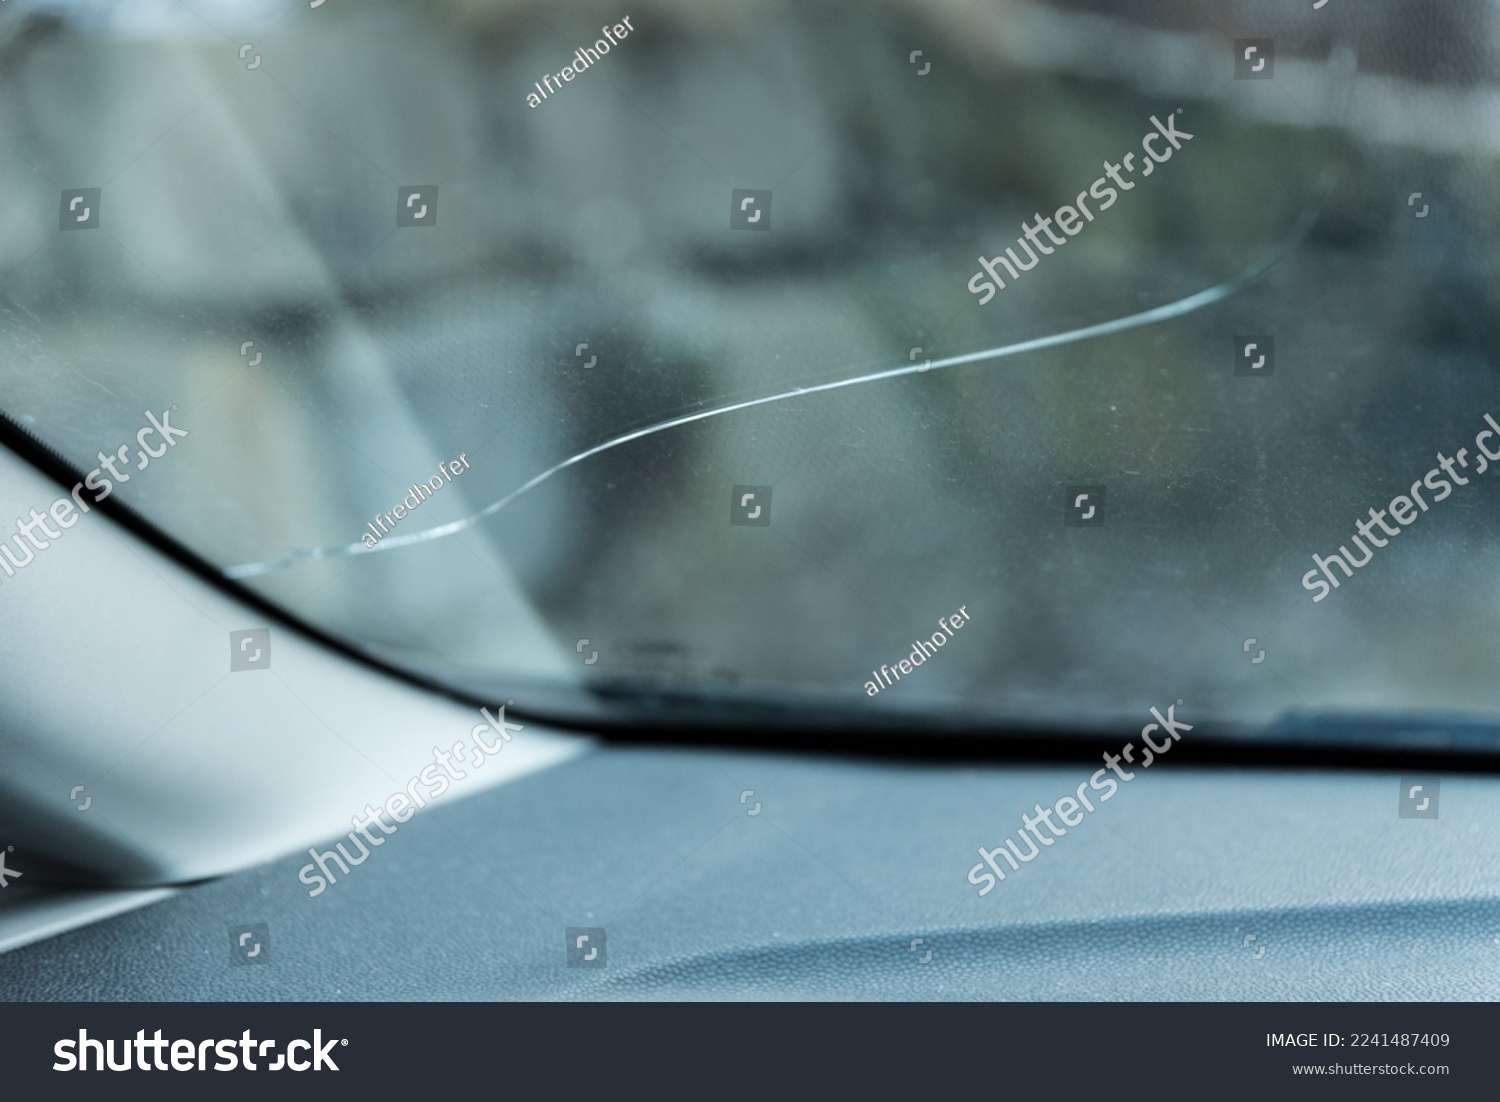 Defective windshield from falling rocks - crack in the safety glass #2241487409